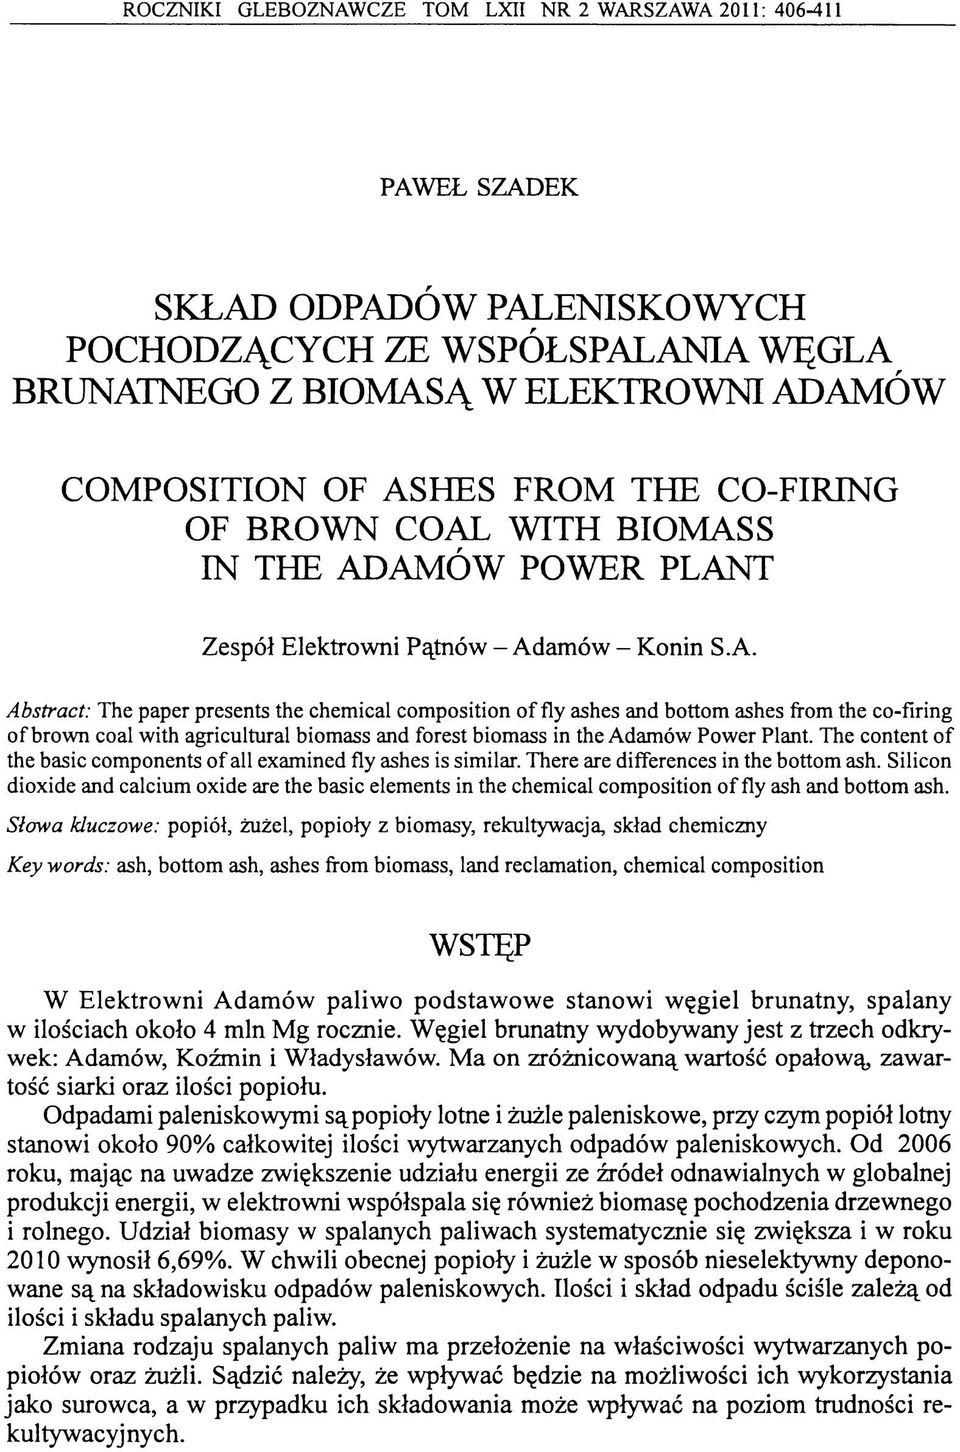 WITH BIOMASS IN THE ADAMÓW POWER PLANT Zespół Elektrowni Pątnów - Adamów - Konin S.A. Abstract: The paper presents the chemical com position o f es and es from the co-firing o f brown coal with agricultural biomass and forest biomass in the Adamów Power Plant.